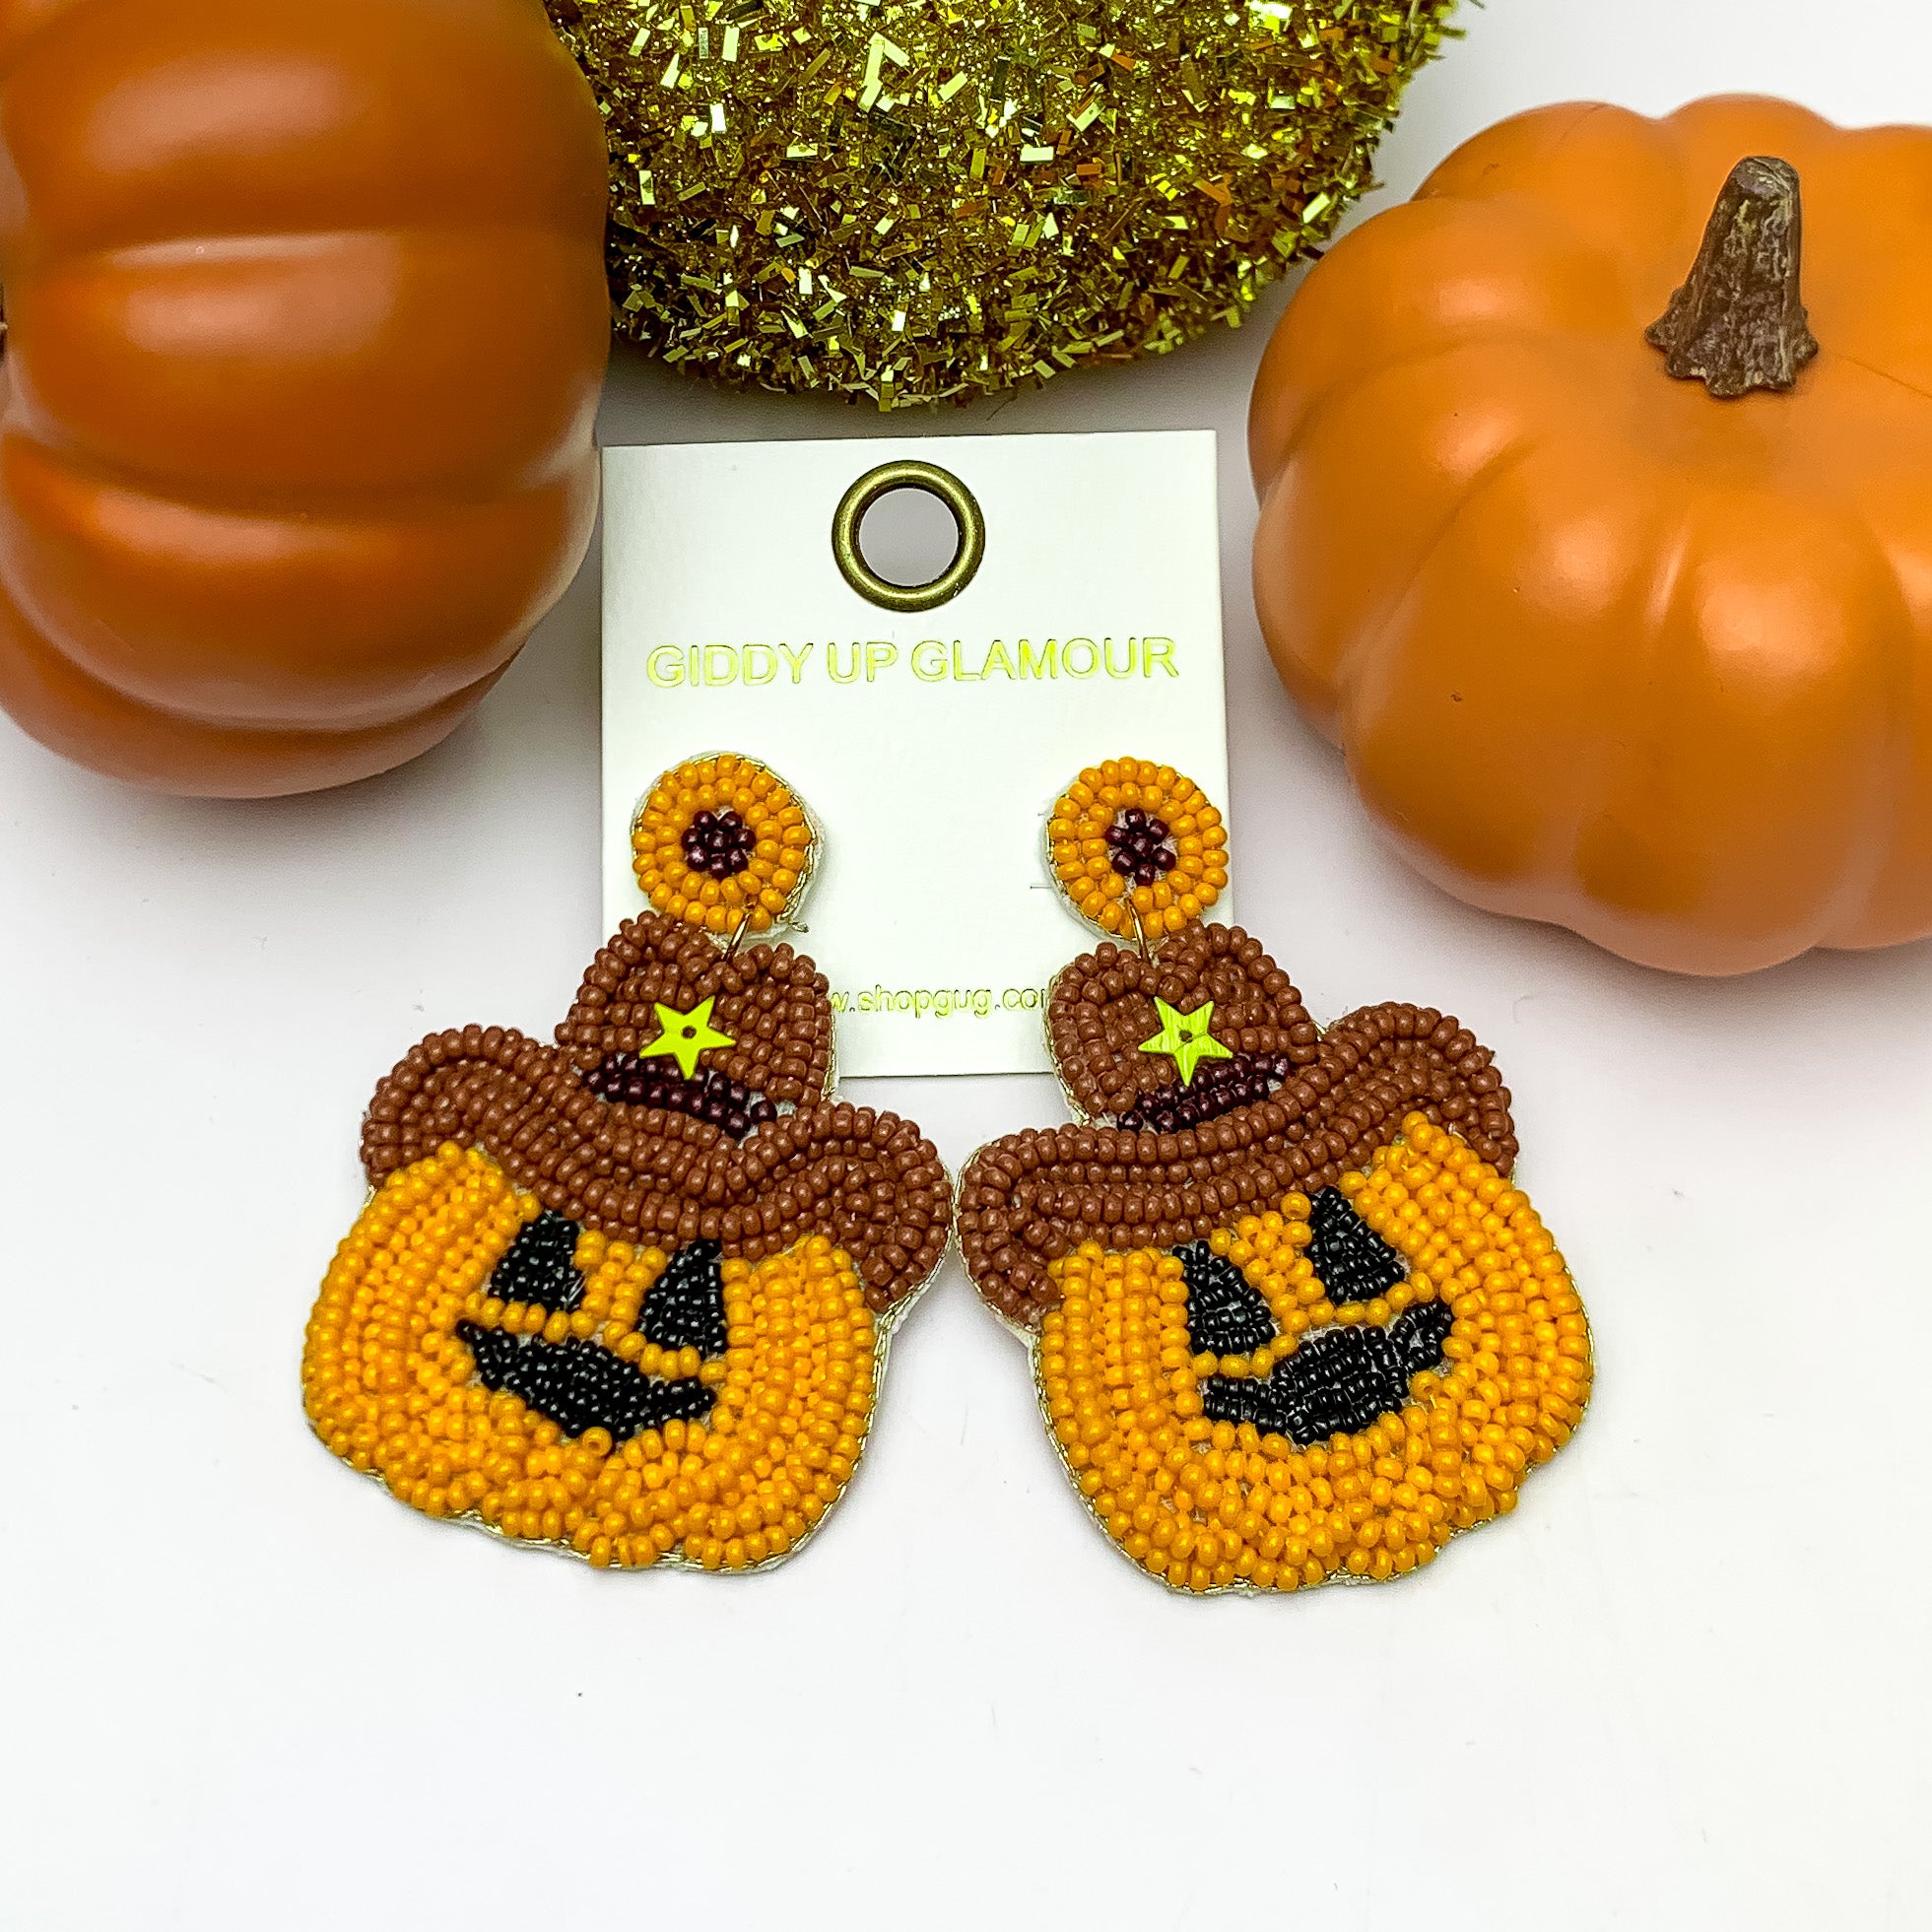 Beaded Pumpkin Earrings With Brown Cowboy Hat. These earrings are pictured on a white background with pumpkins behind the earrings.